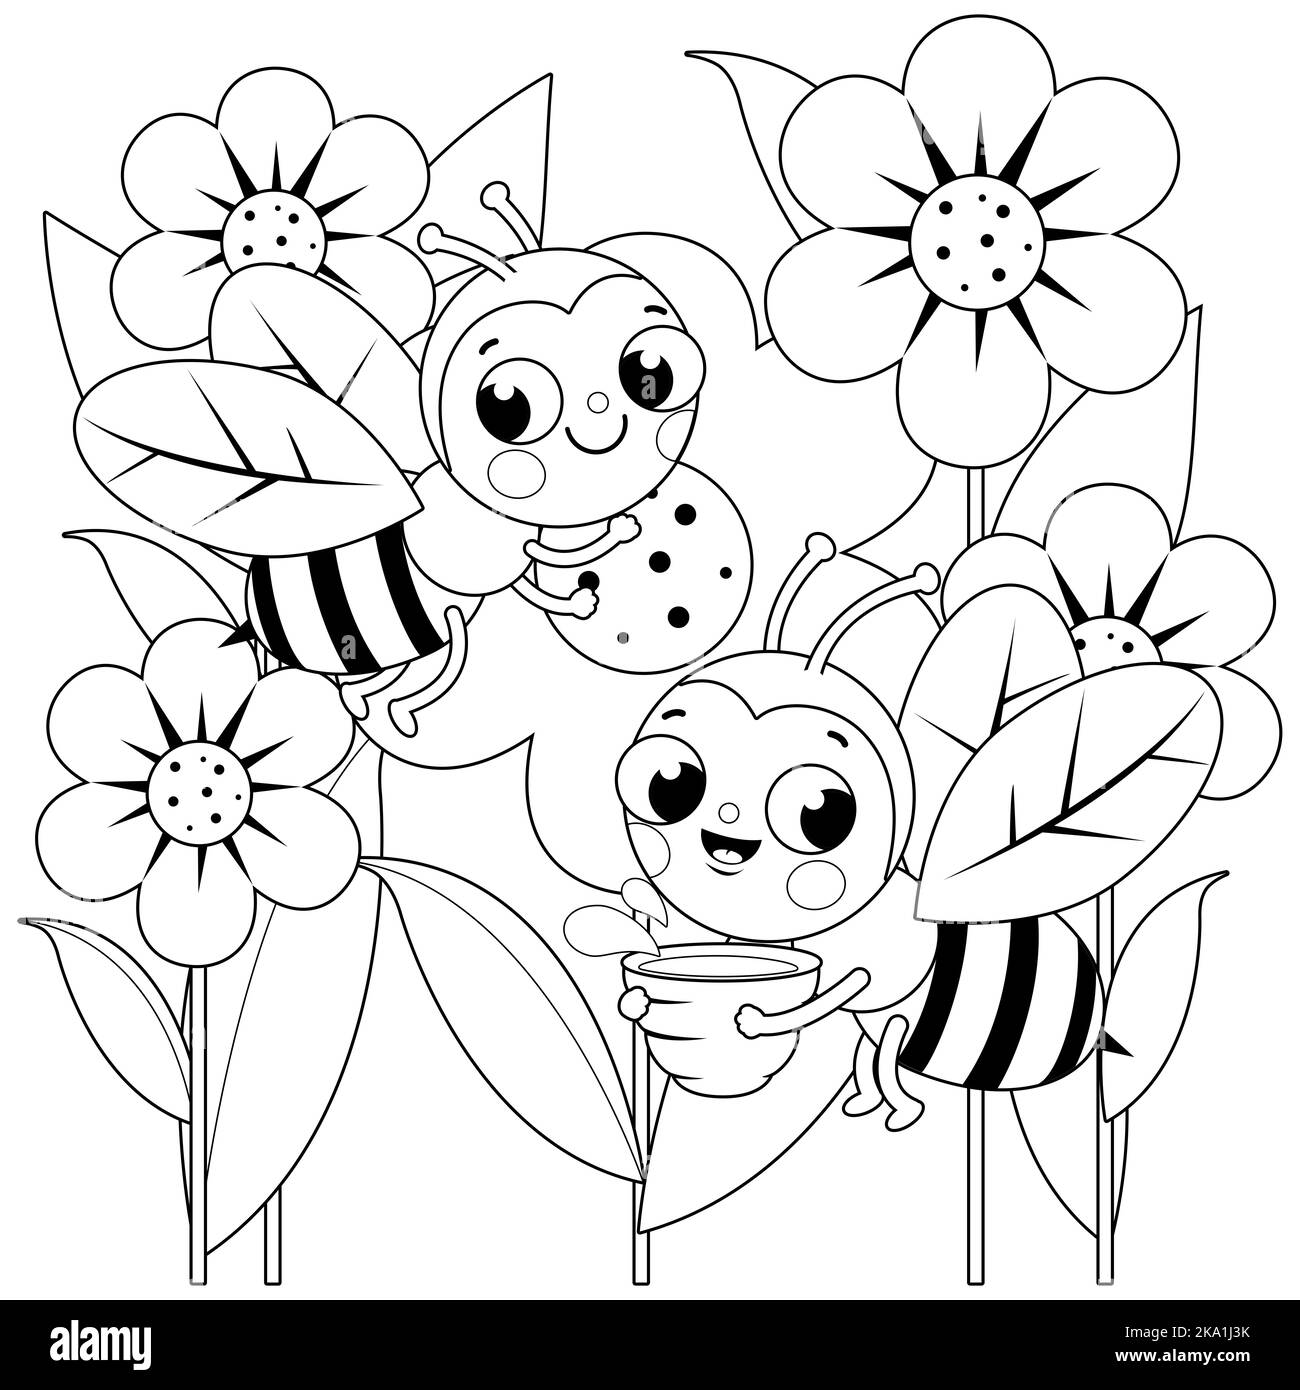 Bees flying around flowers. Black and white coloring page Stock Photo